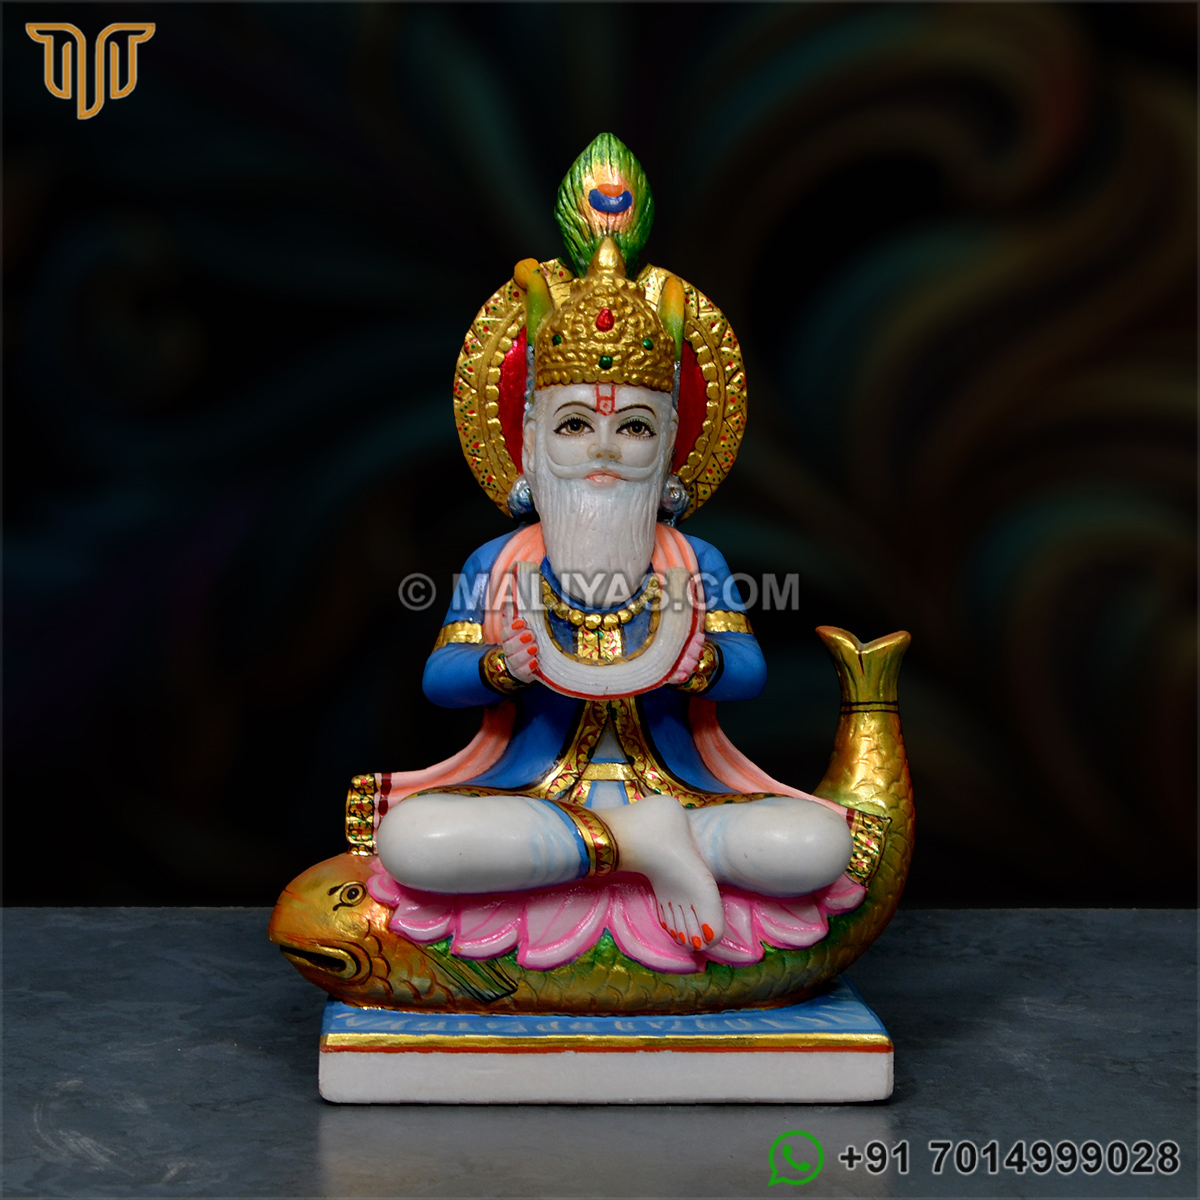 Beautifully Carved Marble Jhulelal Statue